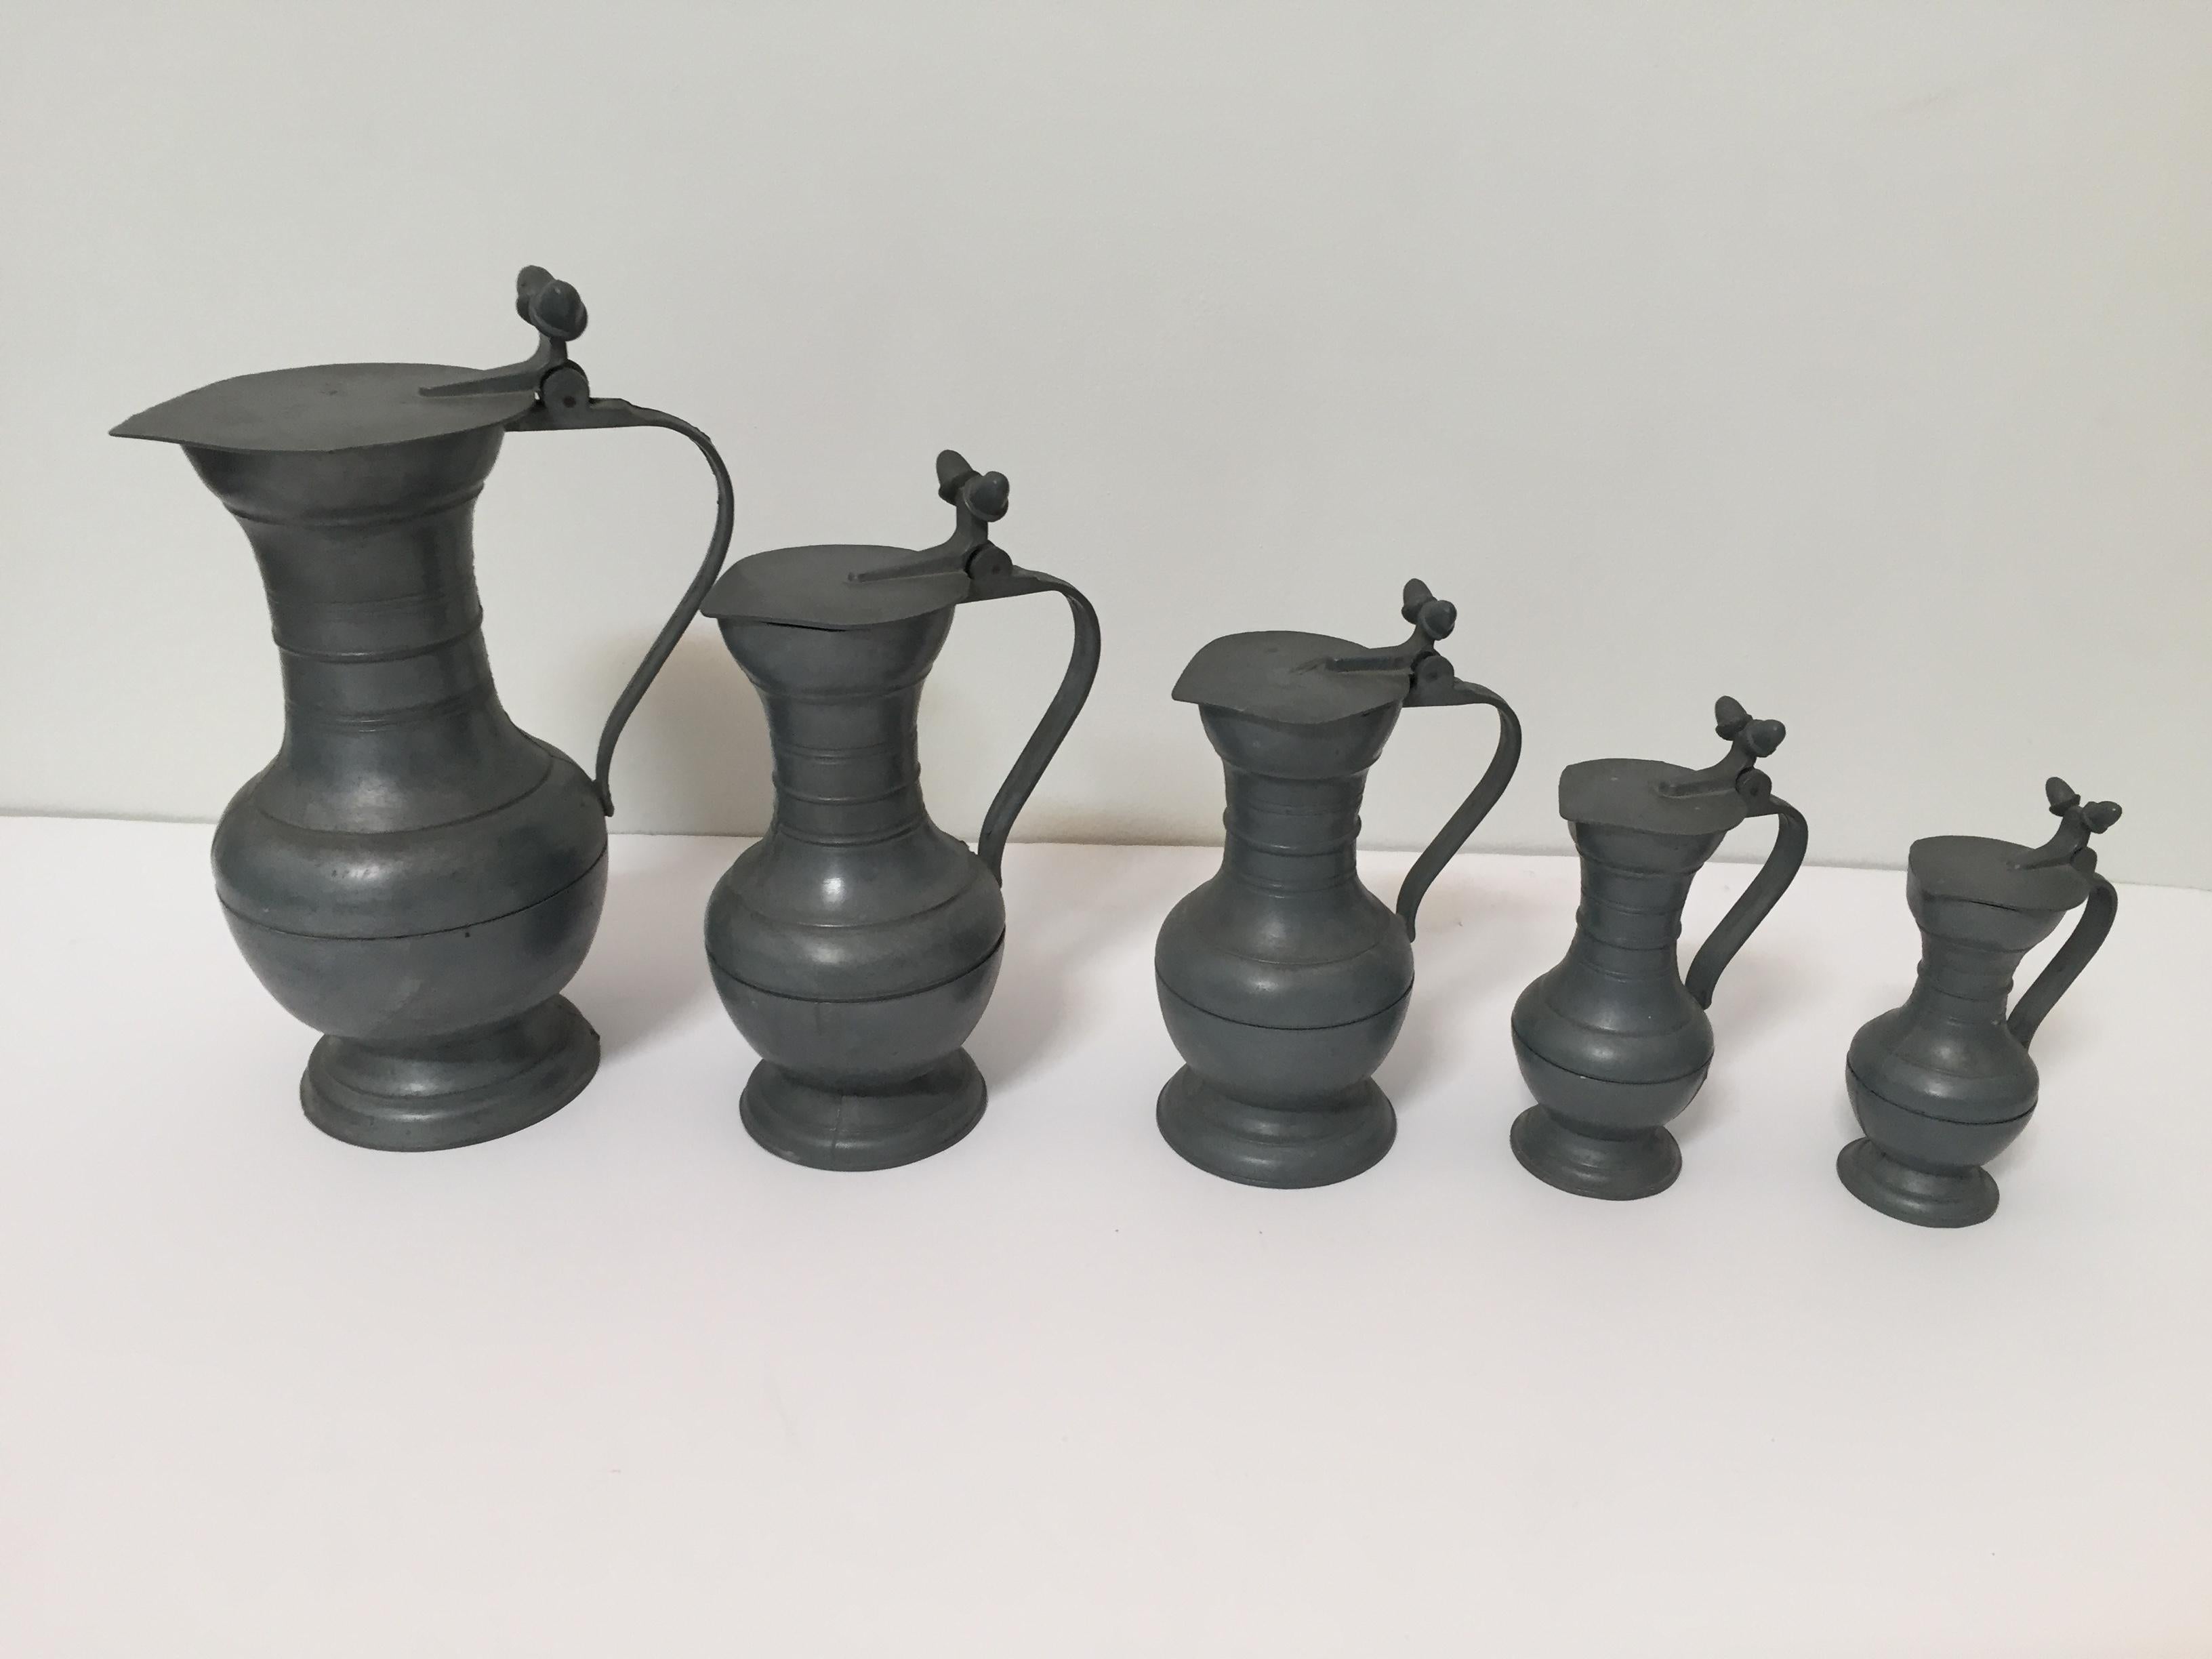 Antique Dutch Holland pewter angel marked tin set of five lidded mugs pitcher
Decorative lidded pewter jugs, Netherlands.
Five pewter lidded pitchers with acorn finials.
Pewter drinking vessel orpitcher with acorn thumb rest, it has a lipped lid and